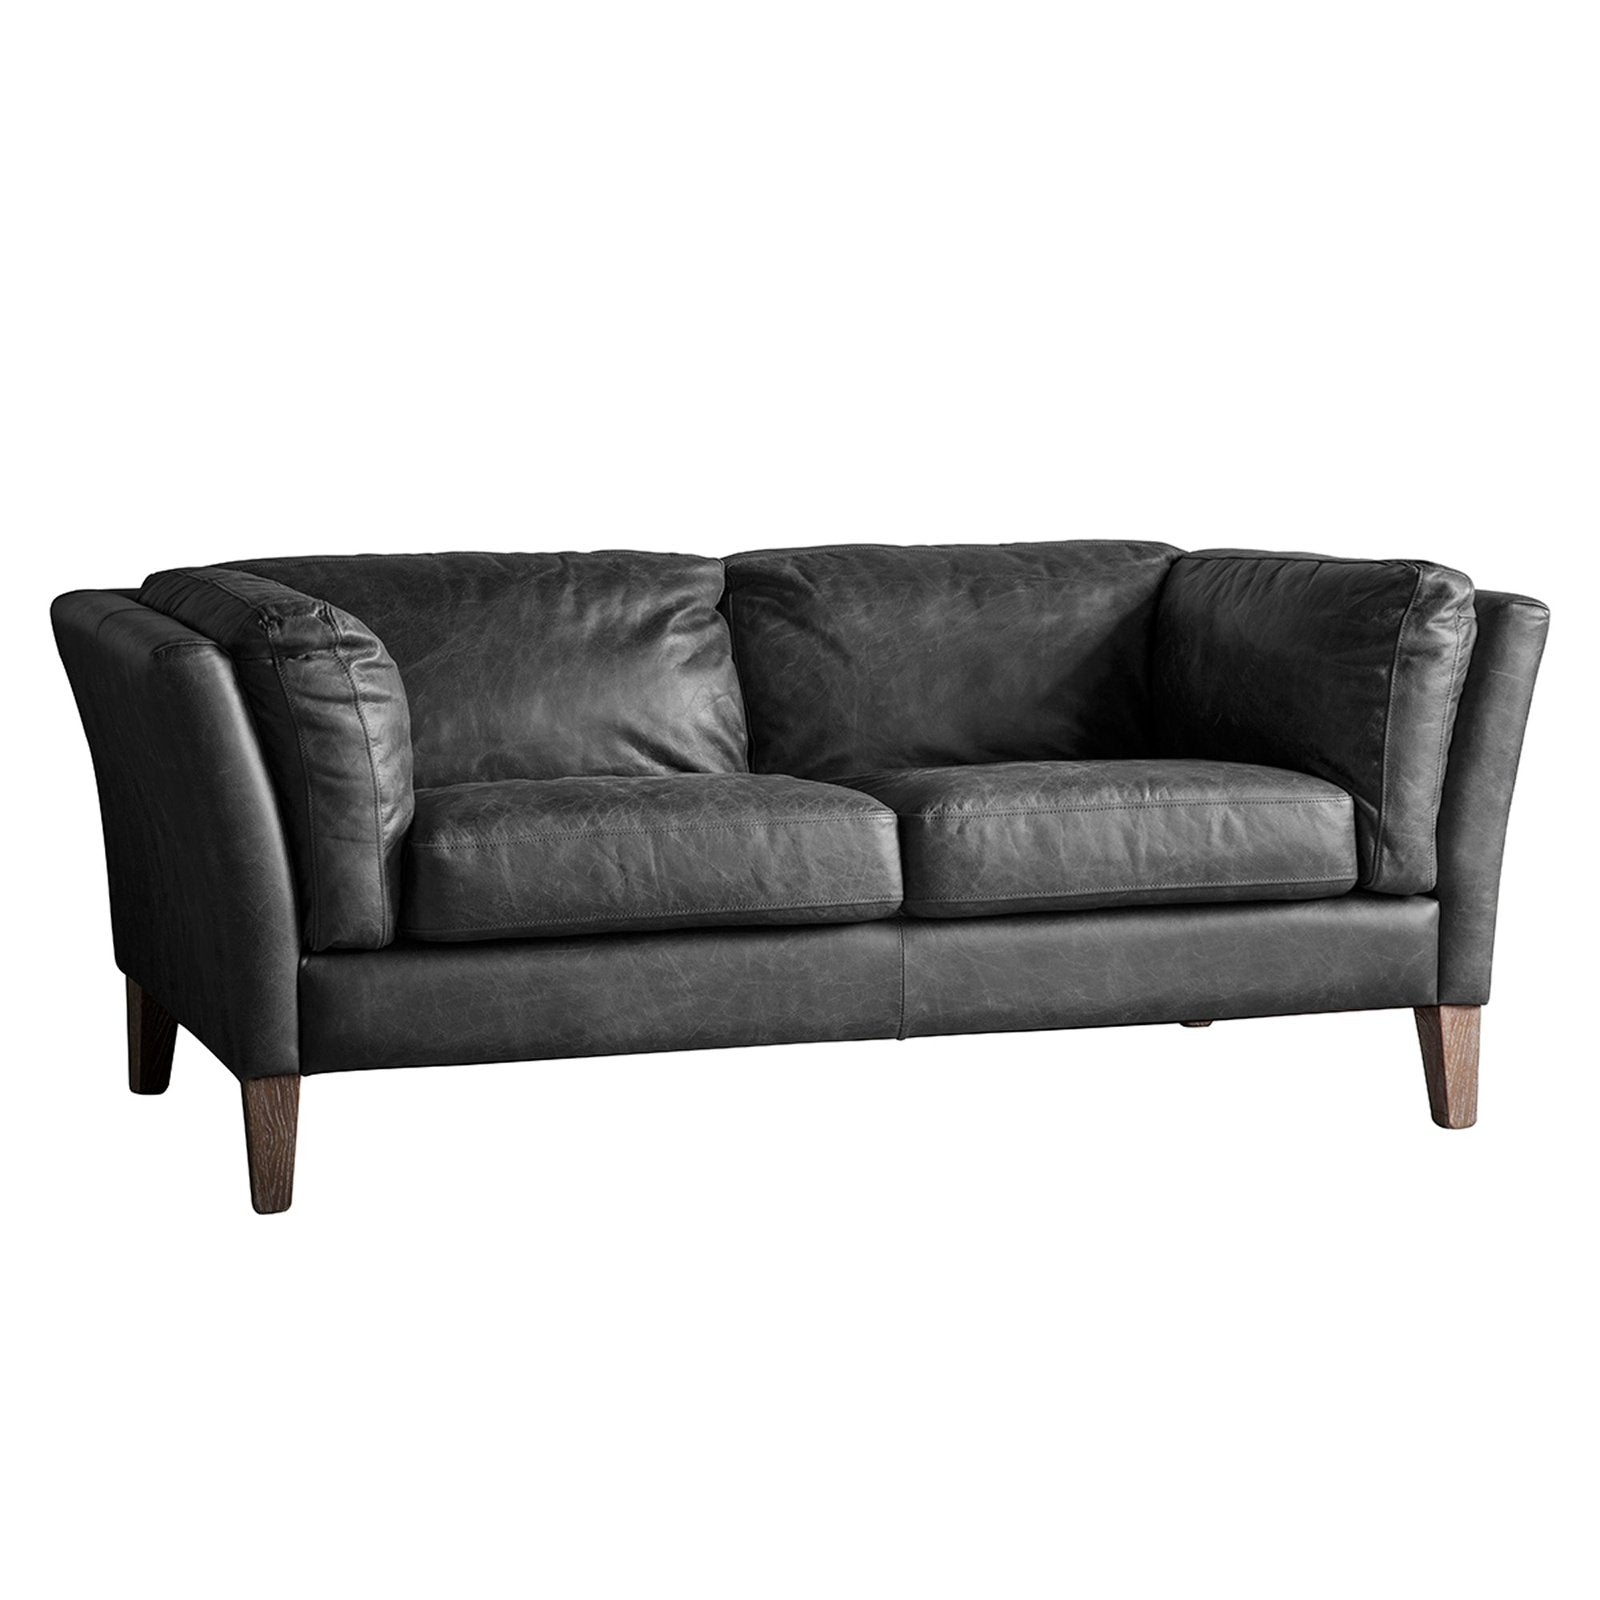 Ebury and Enfield 2 Seater Sofa